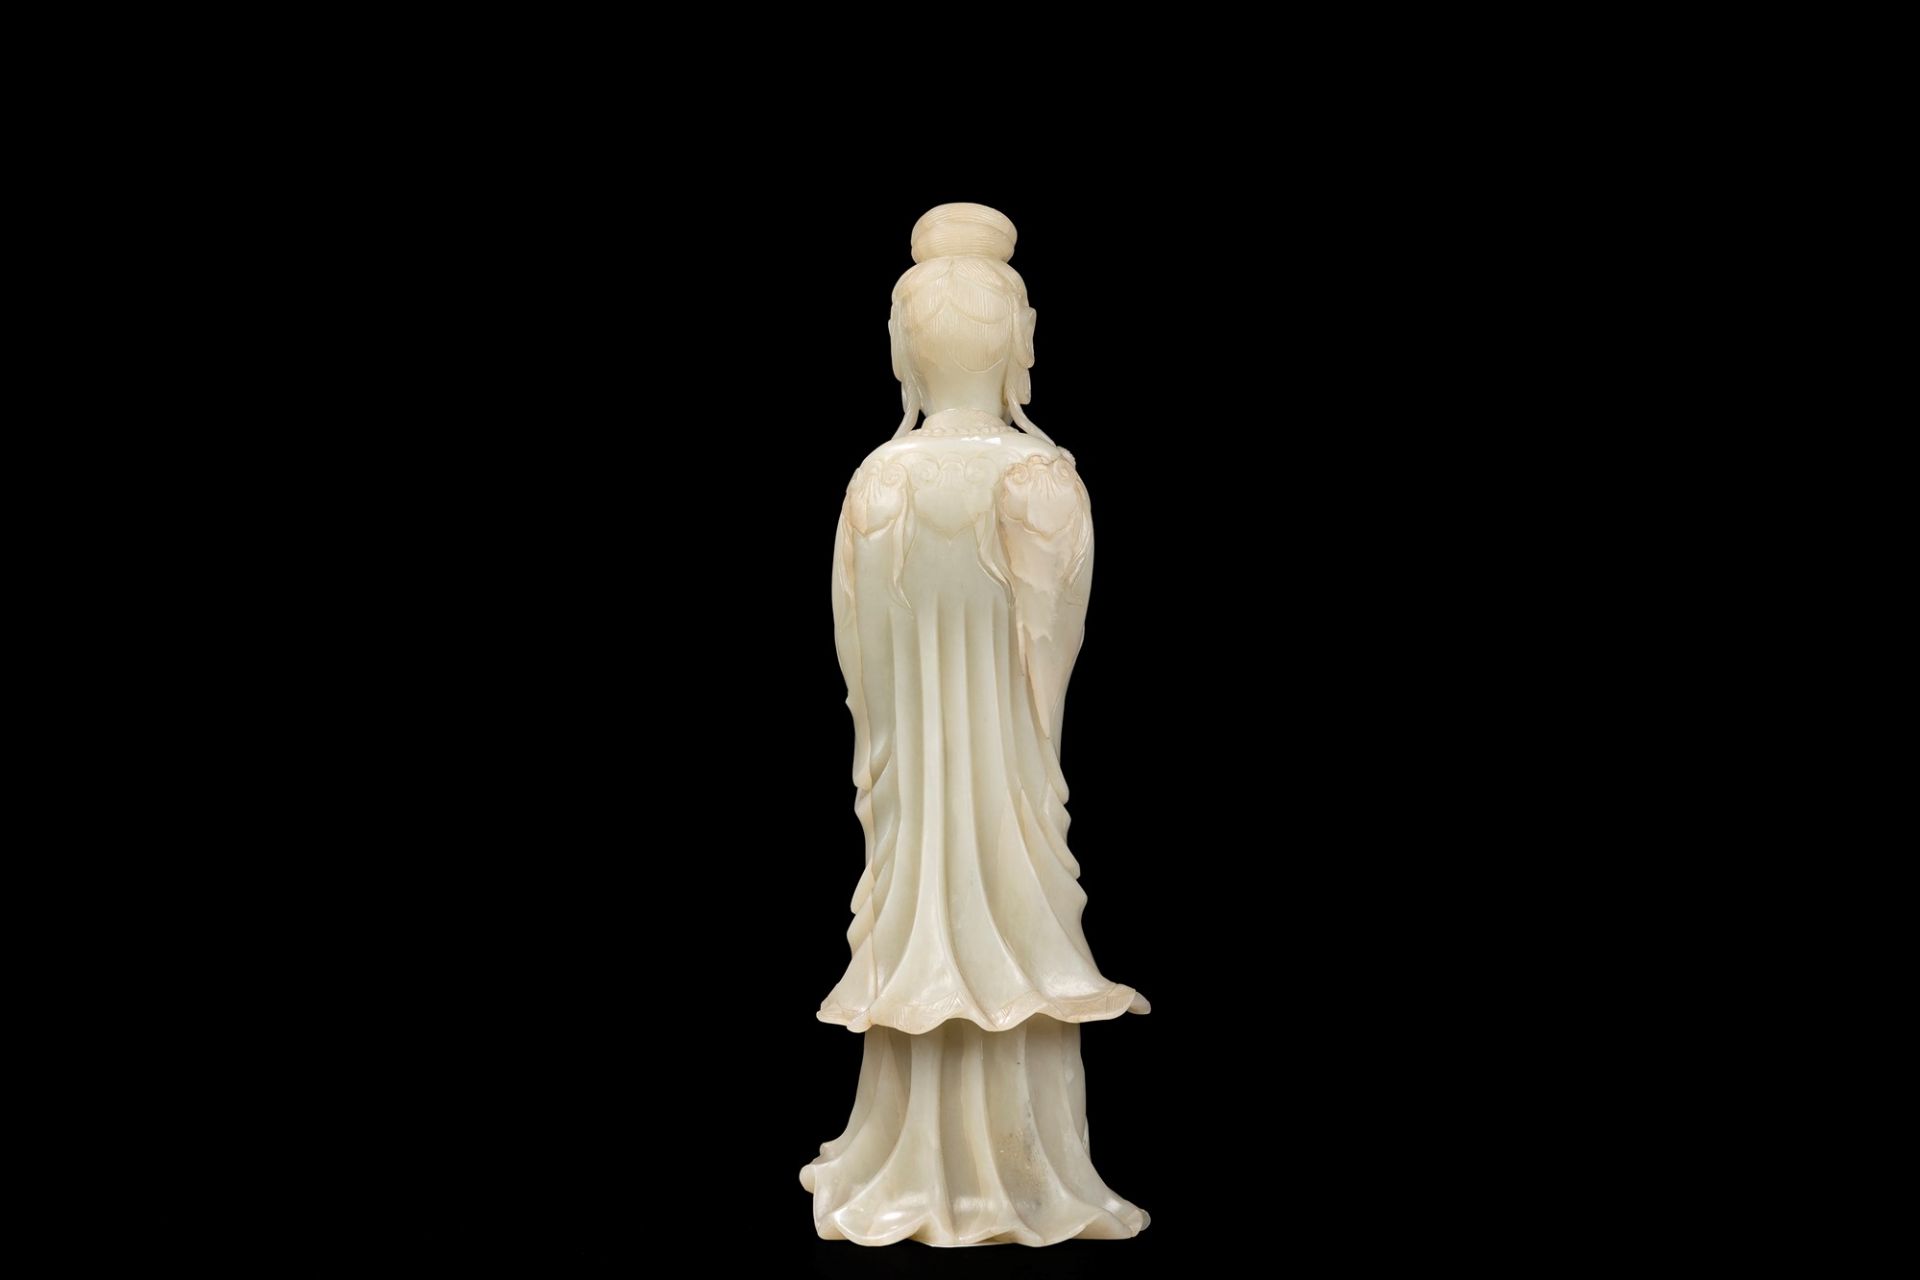 A LARGE PALE CELADON JADE FIGURE OF A STANDING GUANYIN, China, Qing dynasty, 19th century - Image 2 of 3